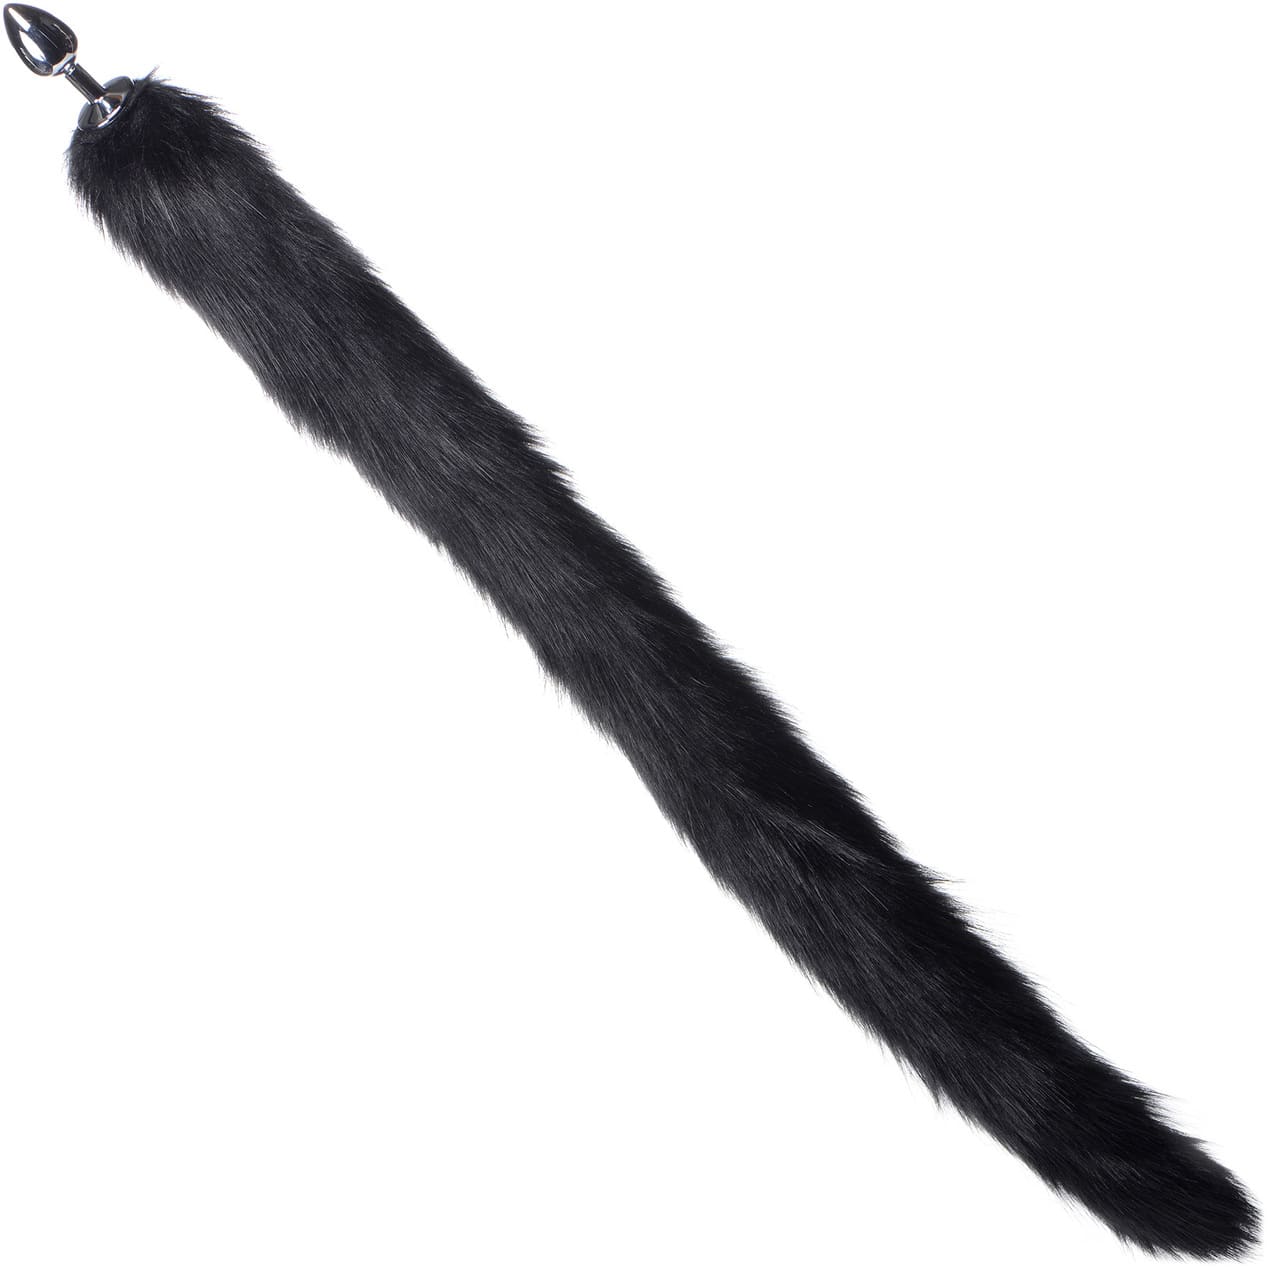 Tailz Aluminum Anal Plug With Extra Long Black Faux Mink Tail. Slide 3